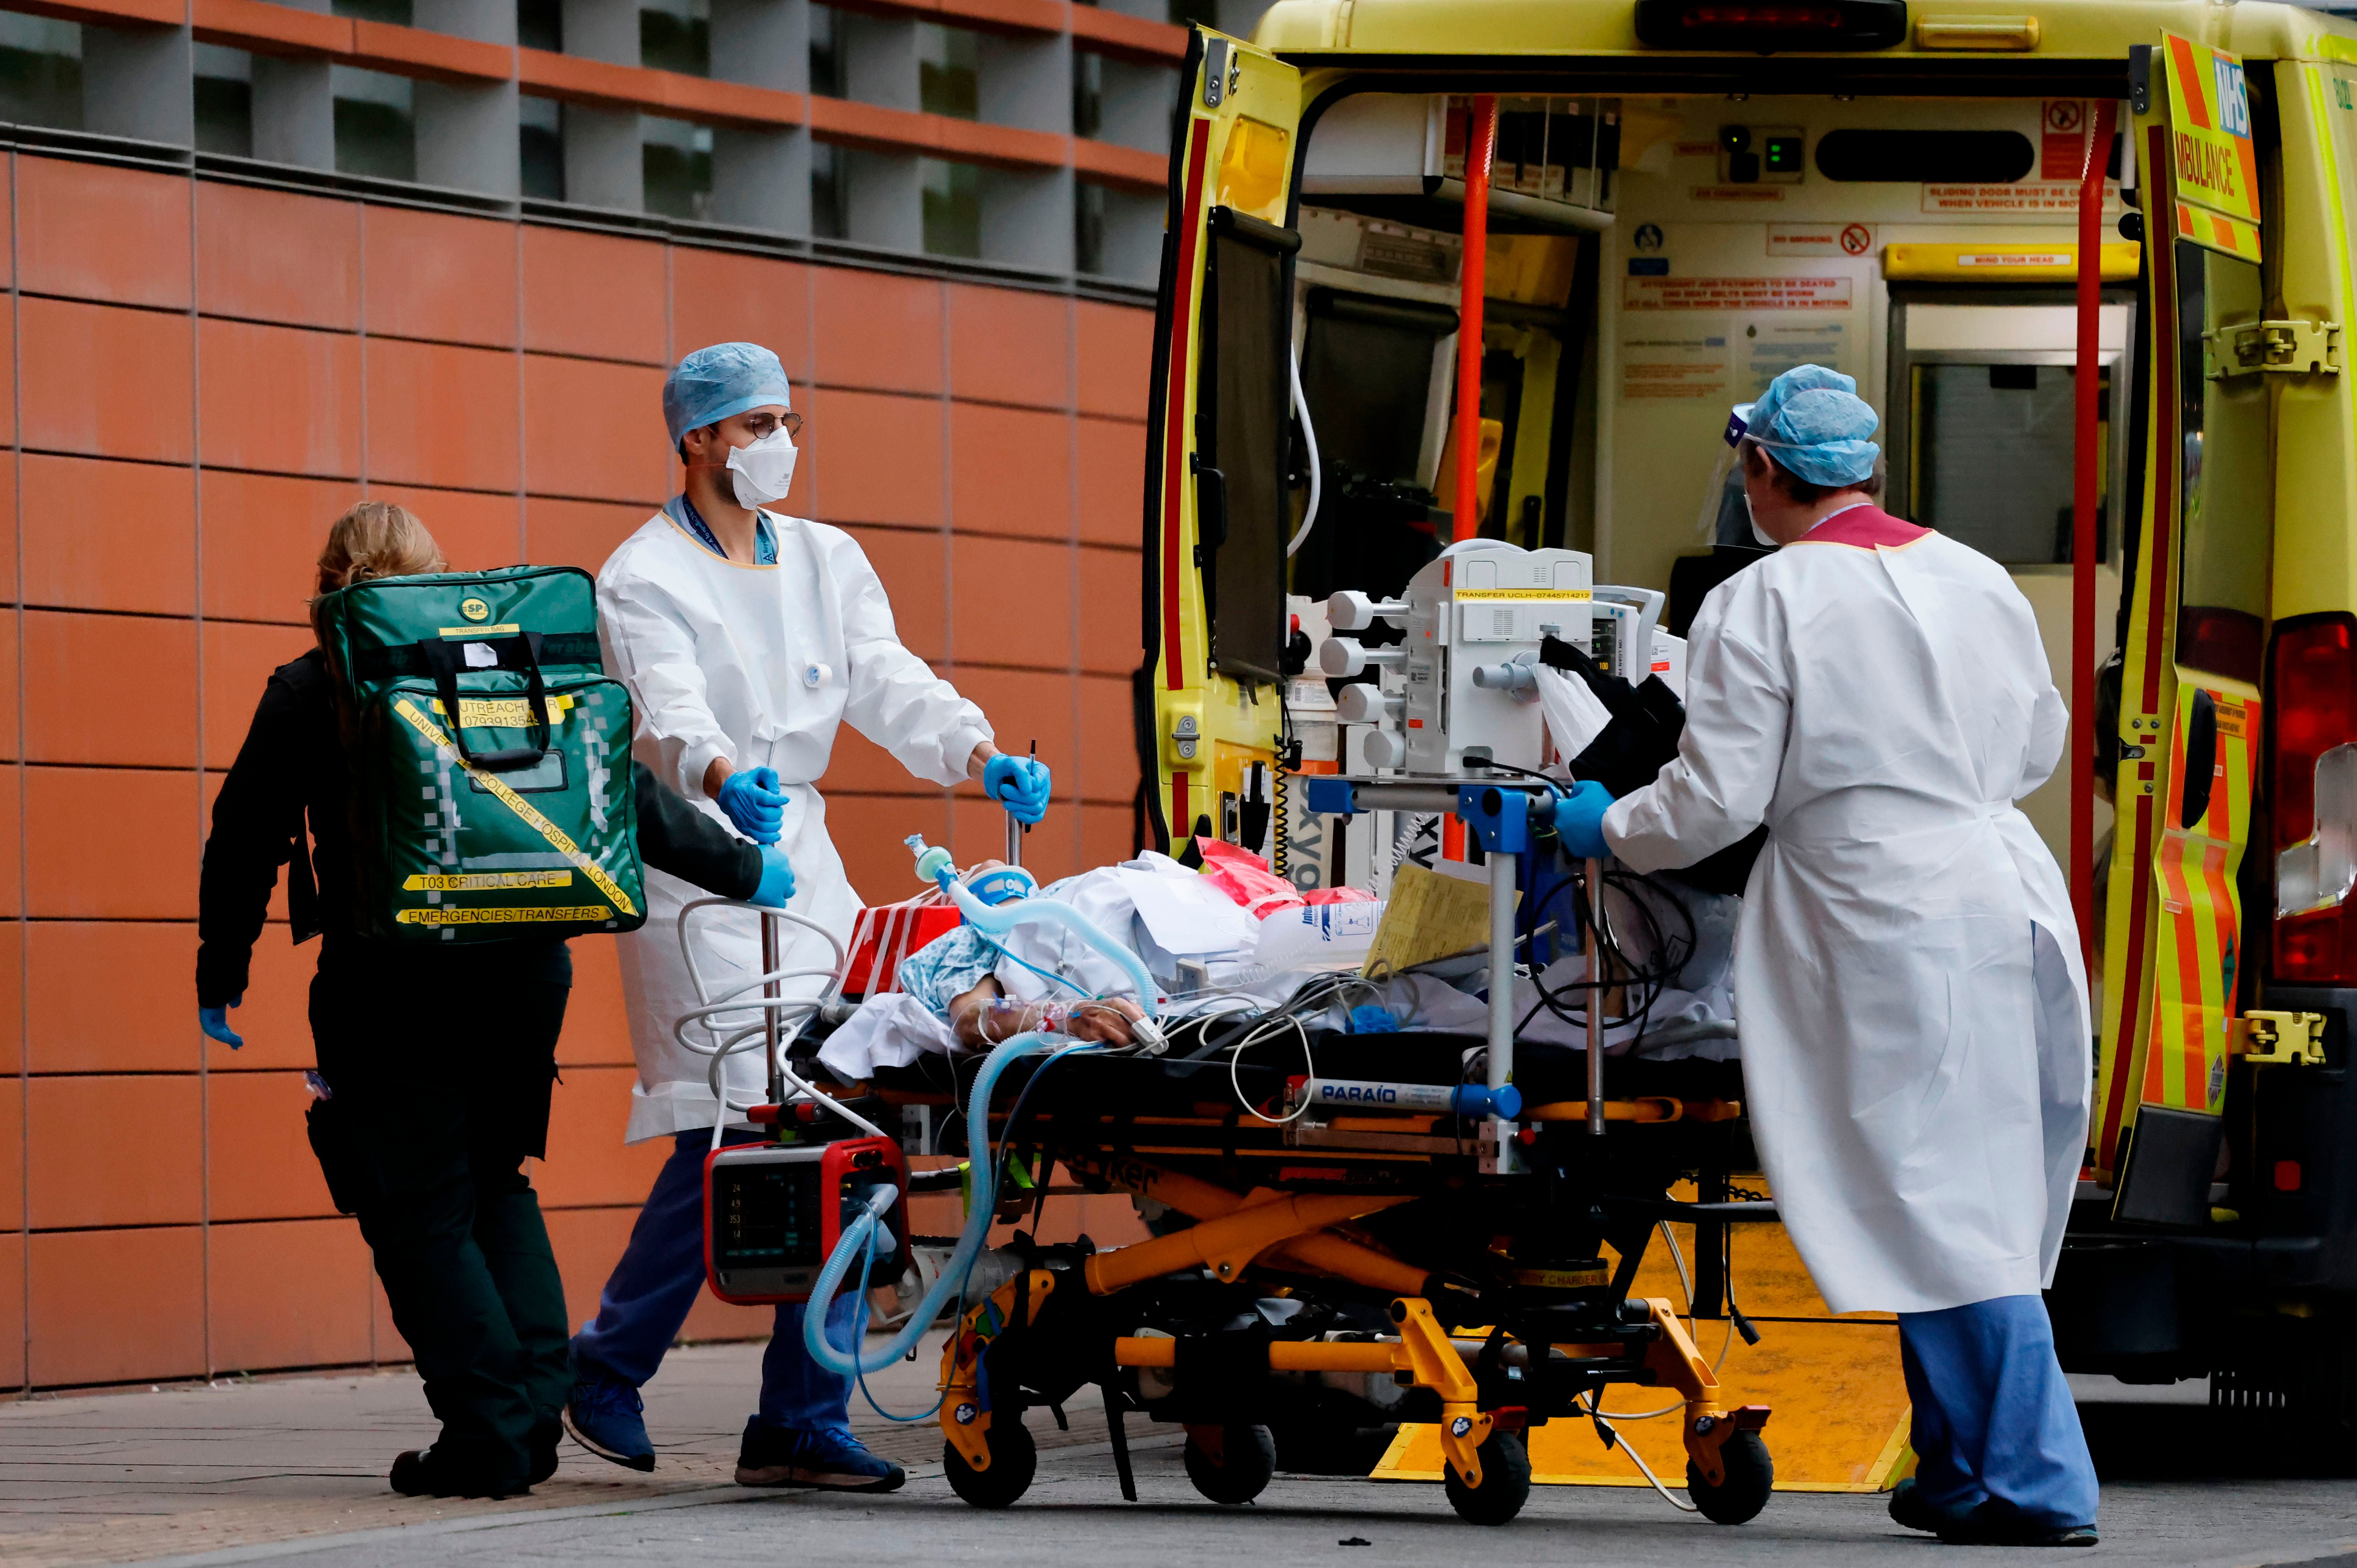 Hospitalisations and deaths have surged across the UK over the past month